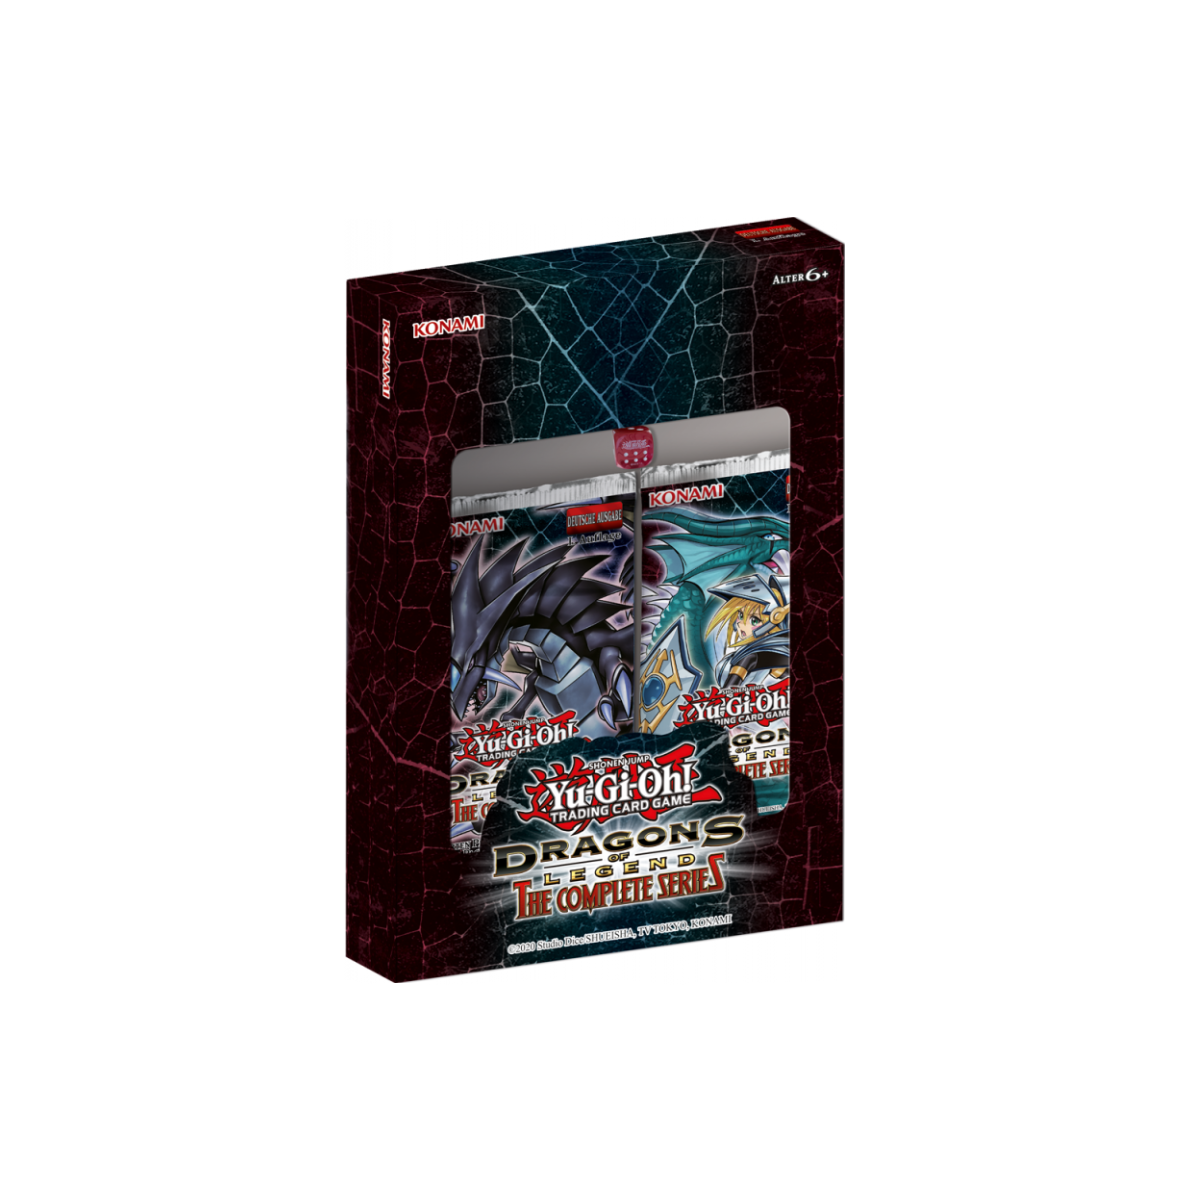 YuGiOh Dragons of Legends Complete Single Booster 